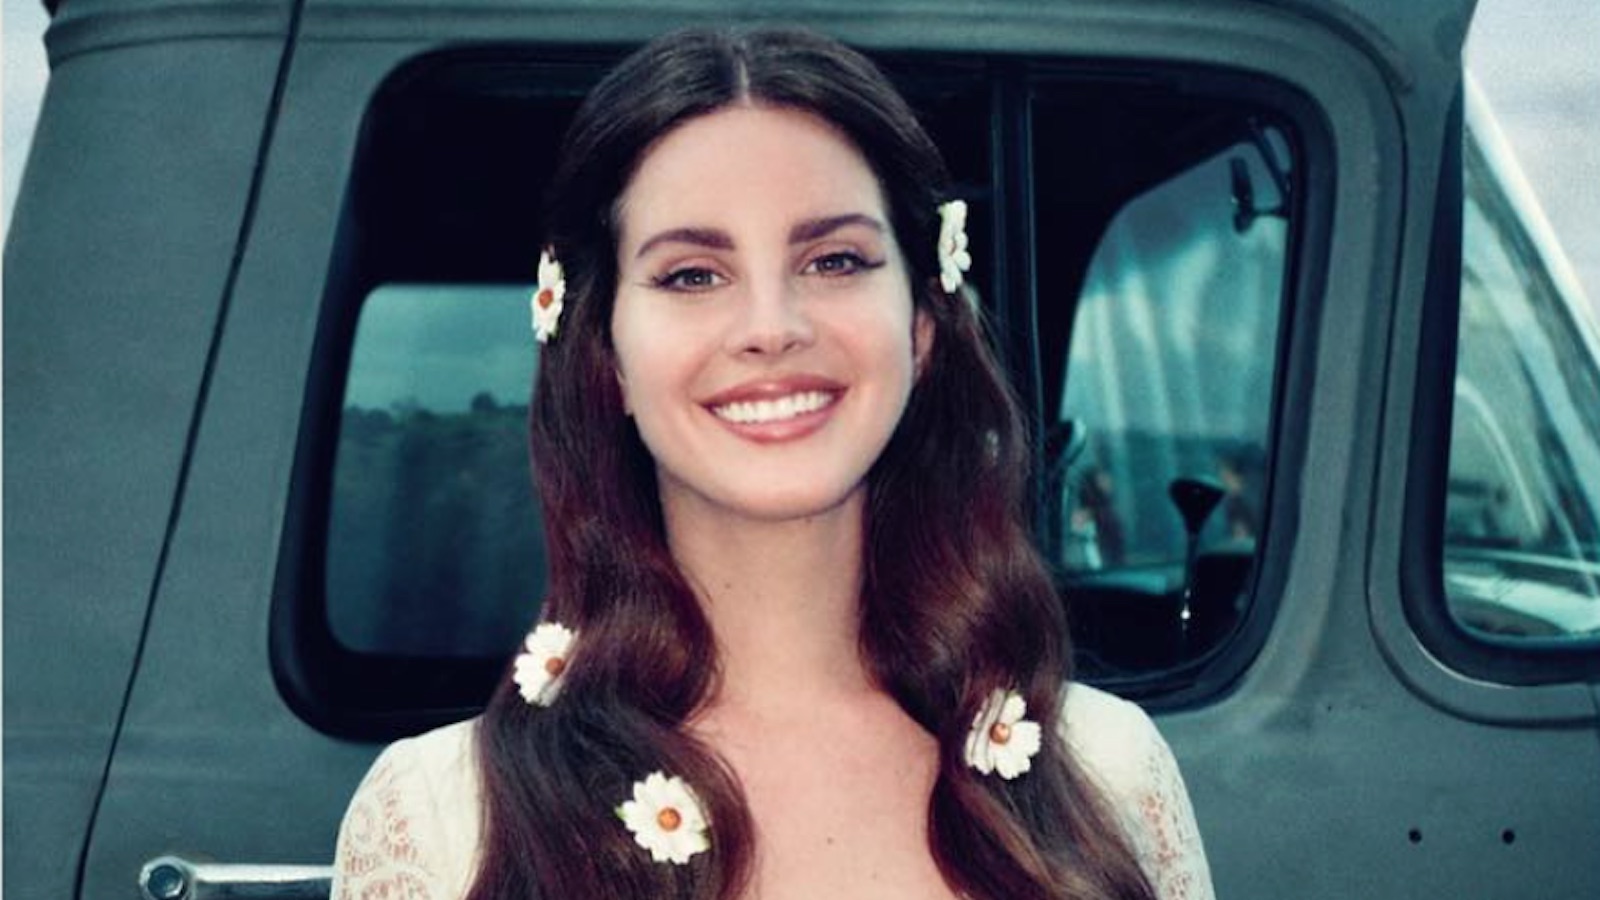 Lana Del Rey's "Lust for Life" Album Cover Is Here - Galore